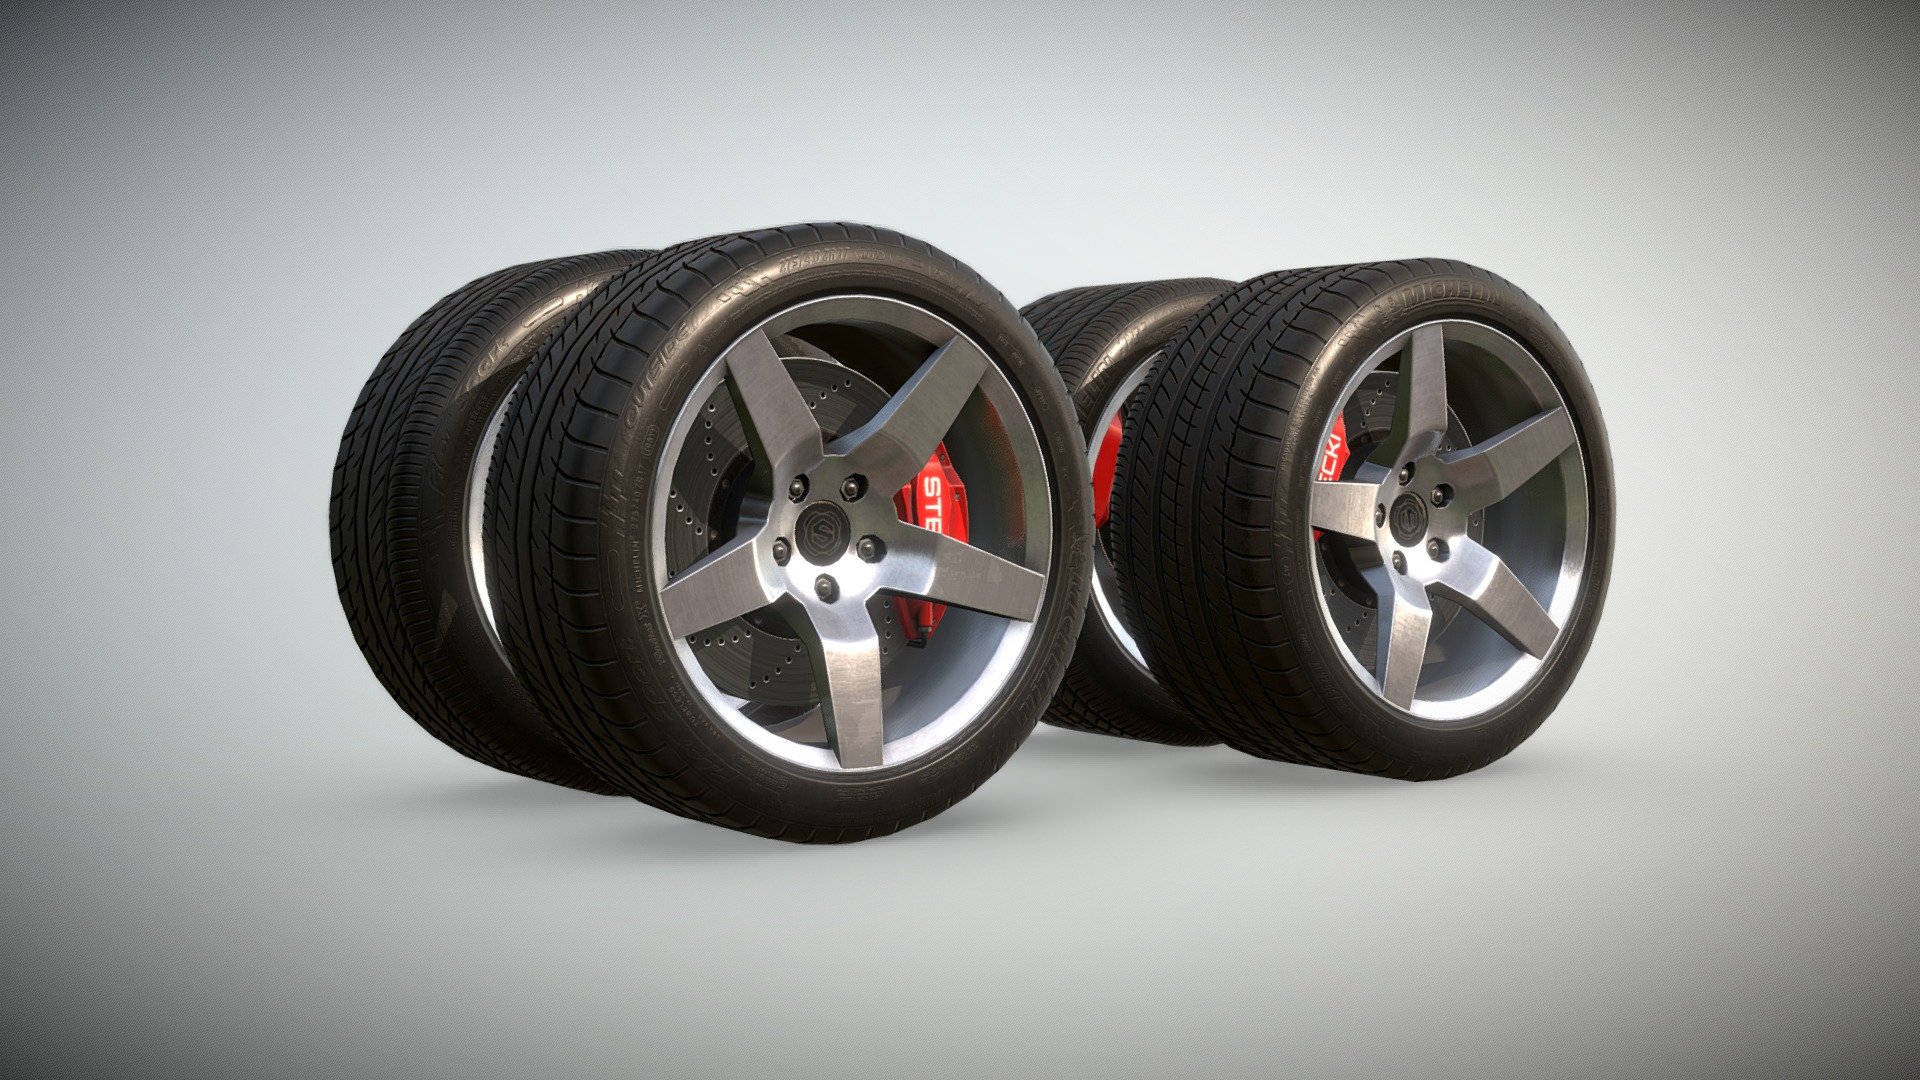 Included in this model kit is a set of 4 modern game engine wheels/brake assets.  There are bolt models on the brake hub if you want to remove a tire visually.  

I have also included the high poly source assets (not shown) in FBX format for the Substance bake, as well as pre-smoothed FBXs (and the Maya scene if you use it).  Warning: The high poly asset is not UV'd and will need a bit of work to have the sidewall textures appear correctly, but it is completely possible for use in high end vehicle renders.

I have included the Substance (Adobe 7.4.3) source files so you can add/swap logos/colors as needed on the rim and brakes (or anything else you want to do).

I have also included the source Photoshop PSD's for the tire sidewalls.  With this you can adjust/customize the sizes or wording. You will just need to rerender out an alpha map to project in Substance.

These are based on (though not entirely accurate) to Michelin Pilot Sport ZR rated tires (275/40 ZR 17 front and 335/35 ZR 17 rears) 3d model